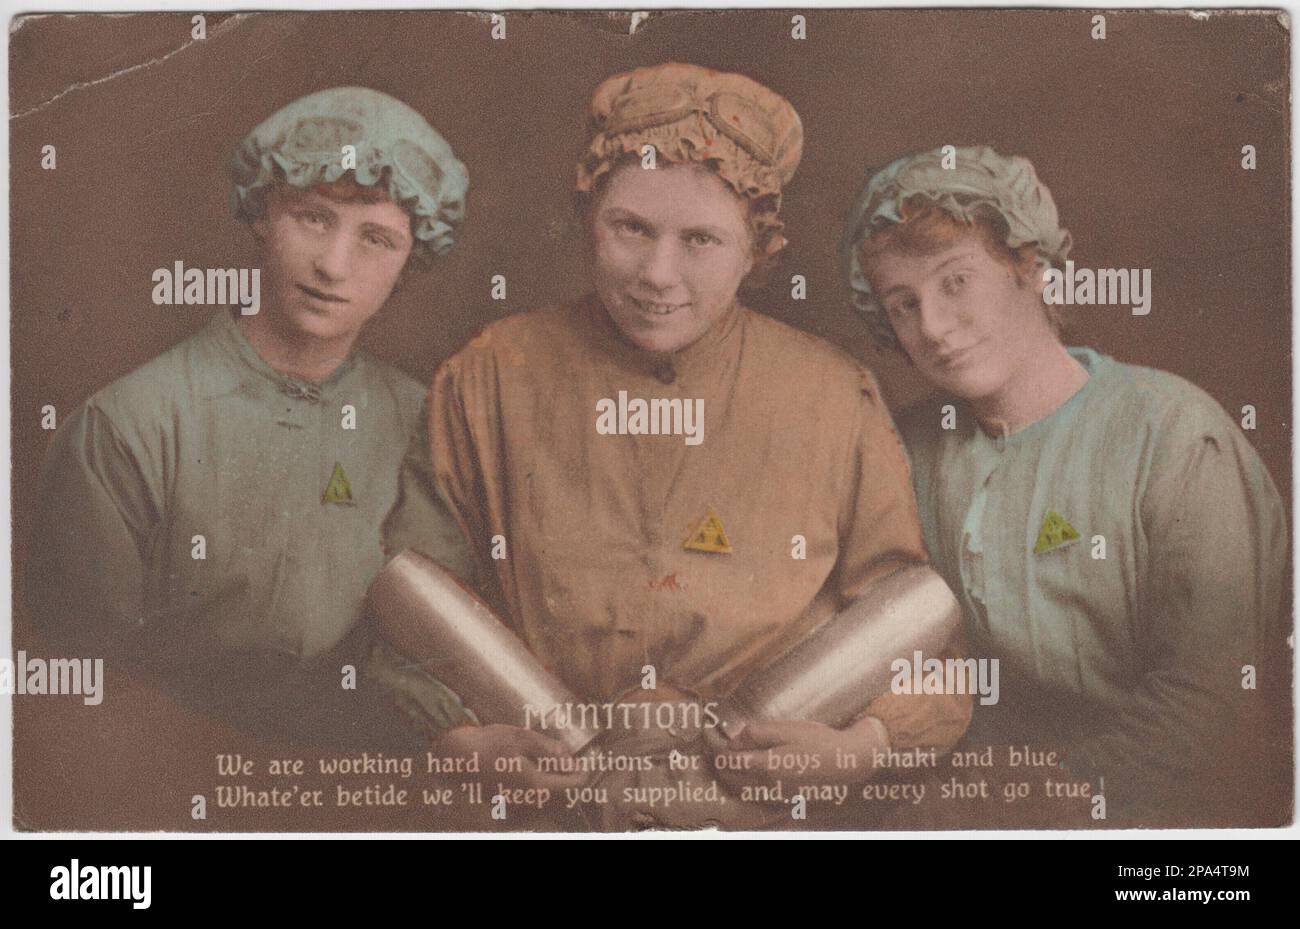 'Munitions. We are working hard on munitions for our boys in khaki and blue. Whate'er betide we'll keep you supplied, and may every shot go true': First World War postcard of three women munitions workers in working clothes (with mob caps). One woman is carrying two shells. All three are wearing triangular 'On War Service' badges Stock Photo